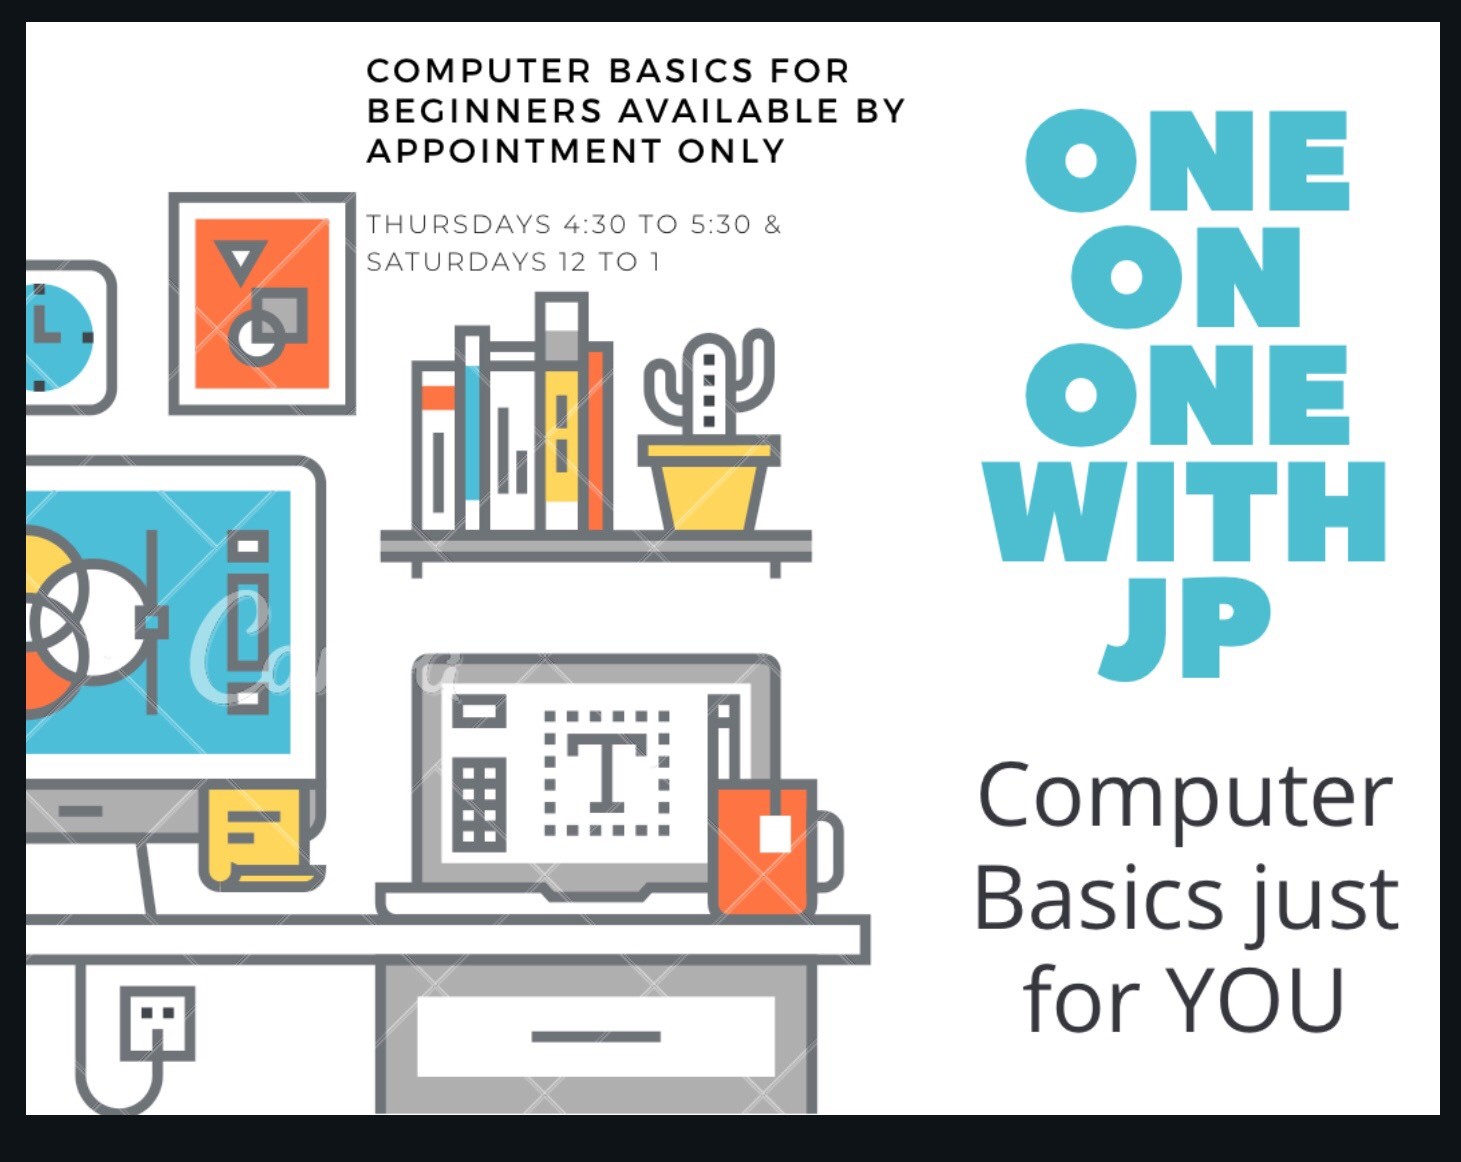 One-on-One Computer Basics @ MLK, Jr. Library